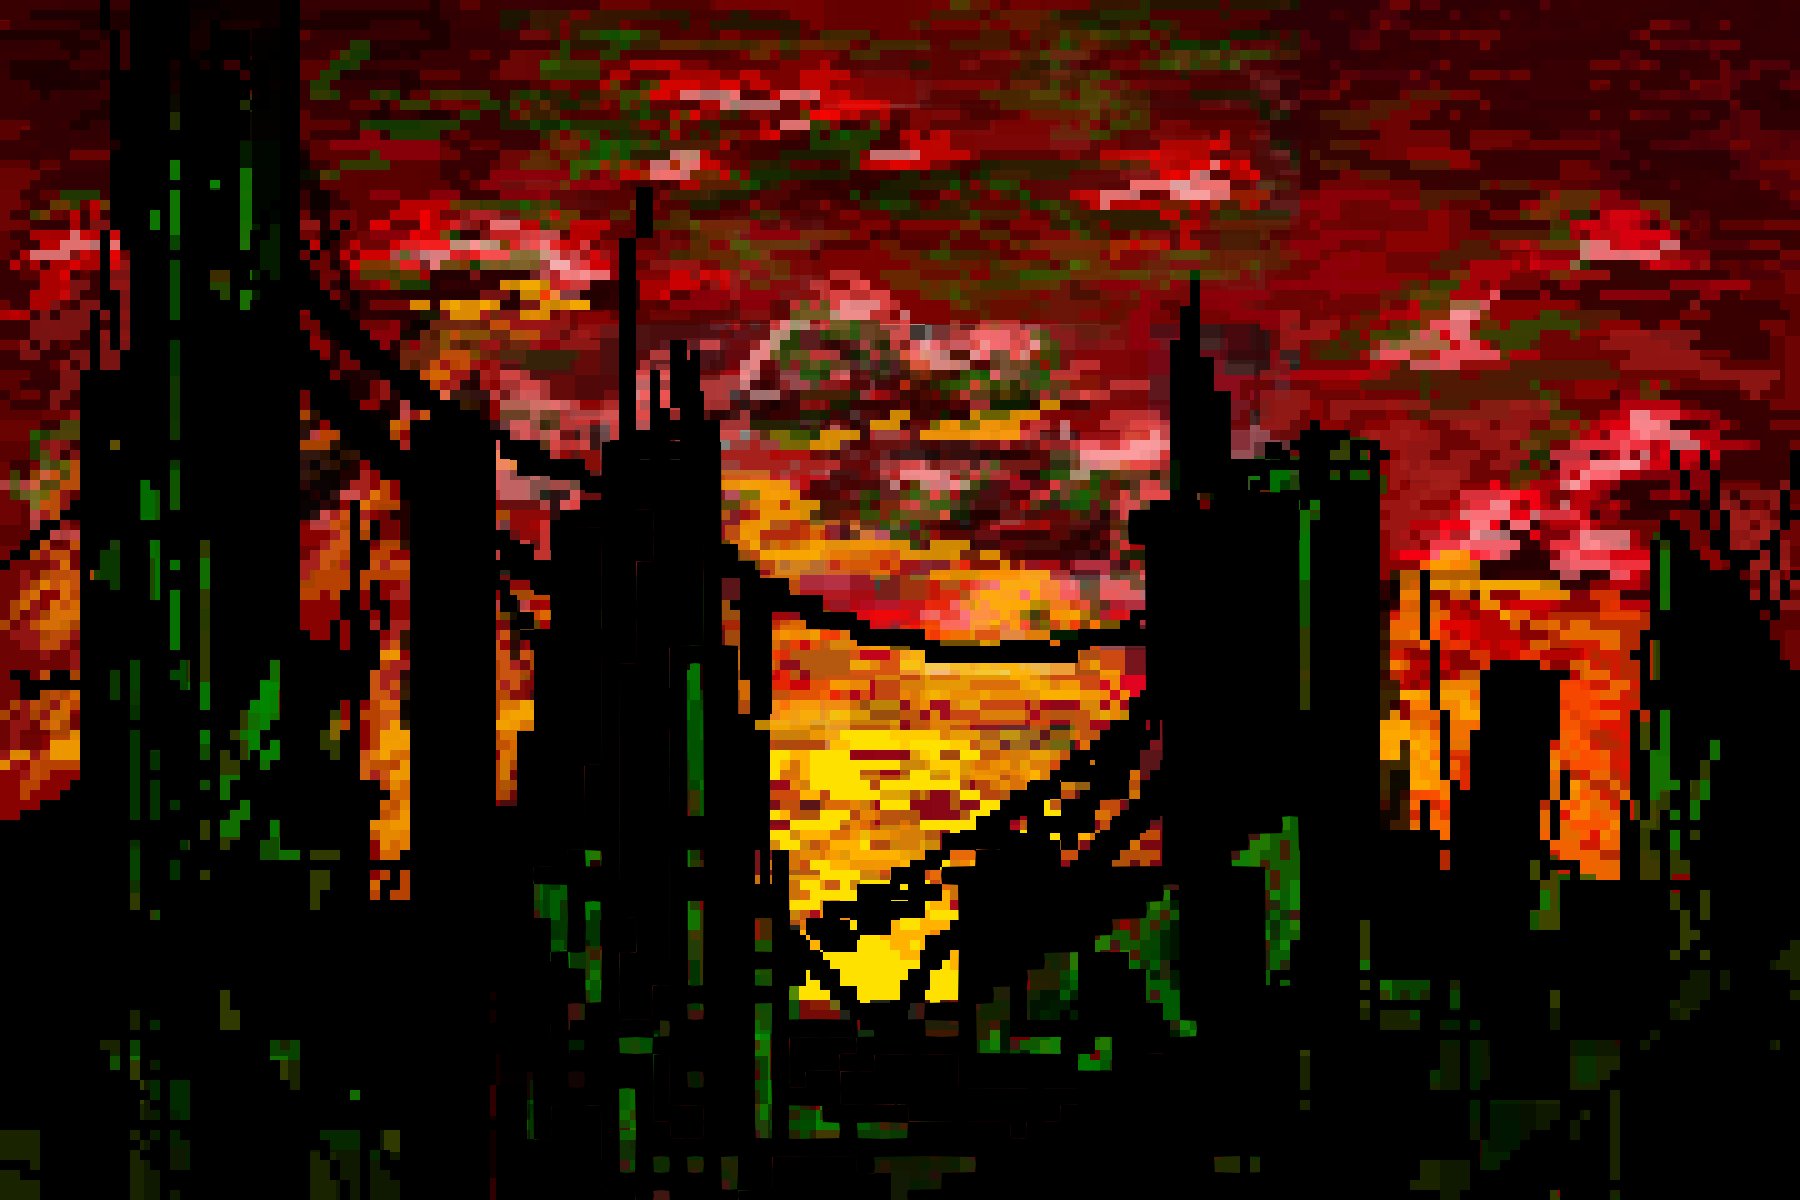 ID: pixel art of a landscape of a ruined city. the skyscrapers are black with the occassional green and the sky decipts sunset or sunrise, yellow and orange at the bottom and red throughout, with reddish clouds and a touch of green.